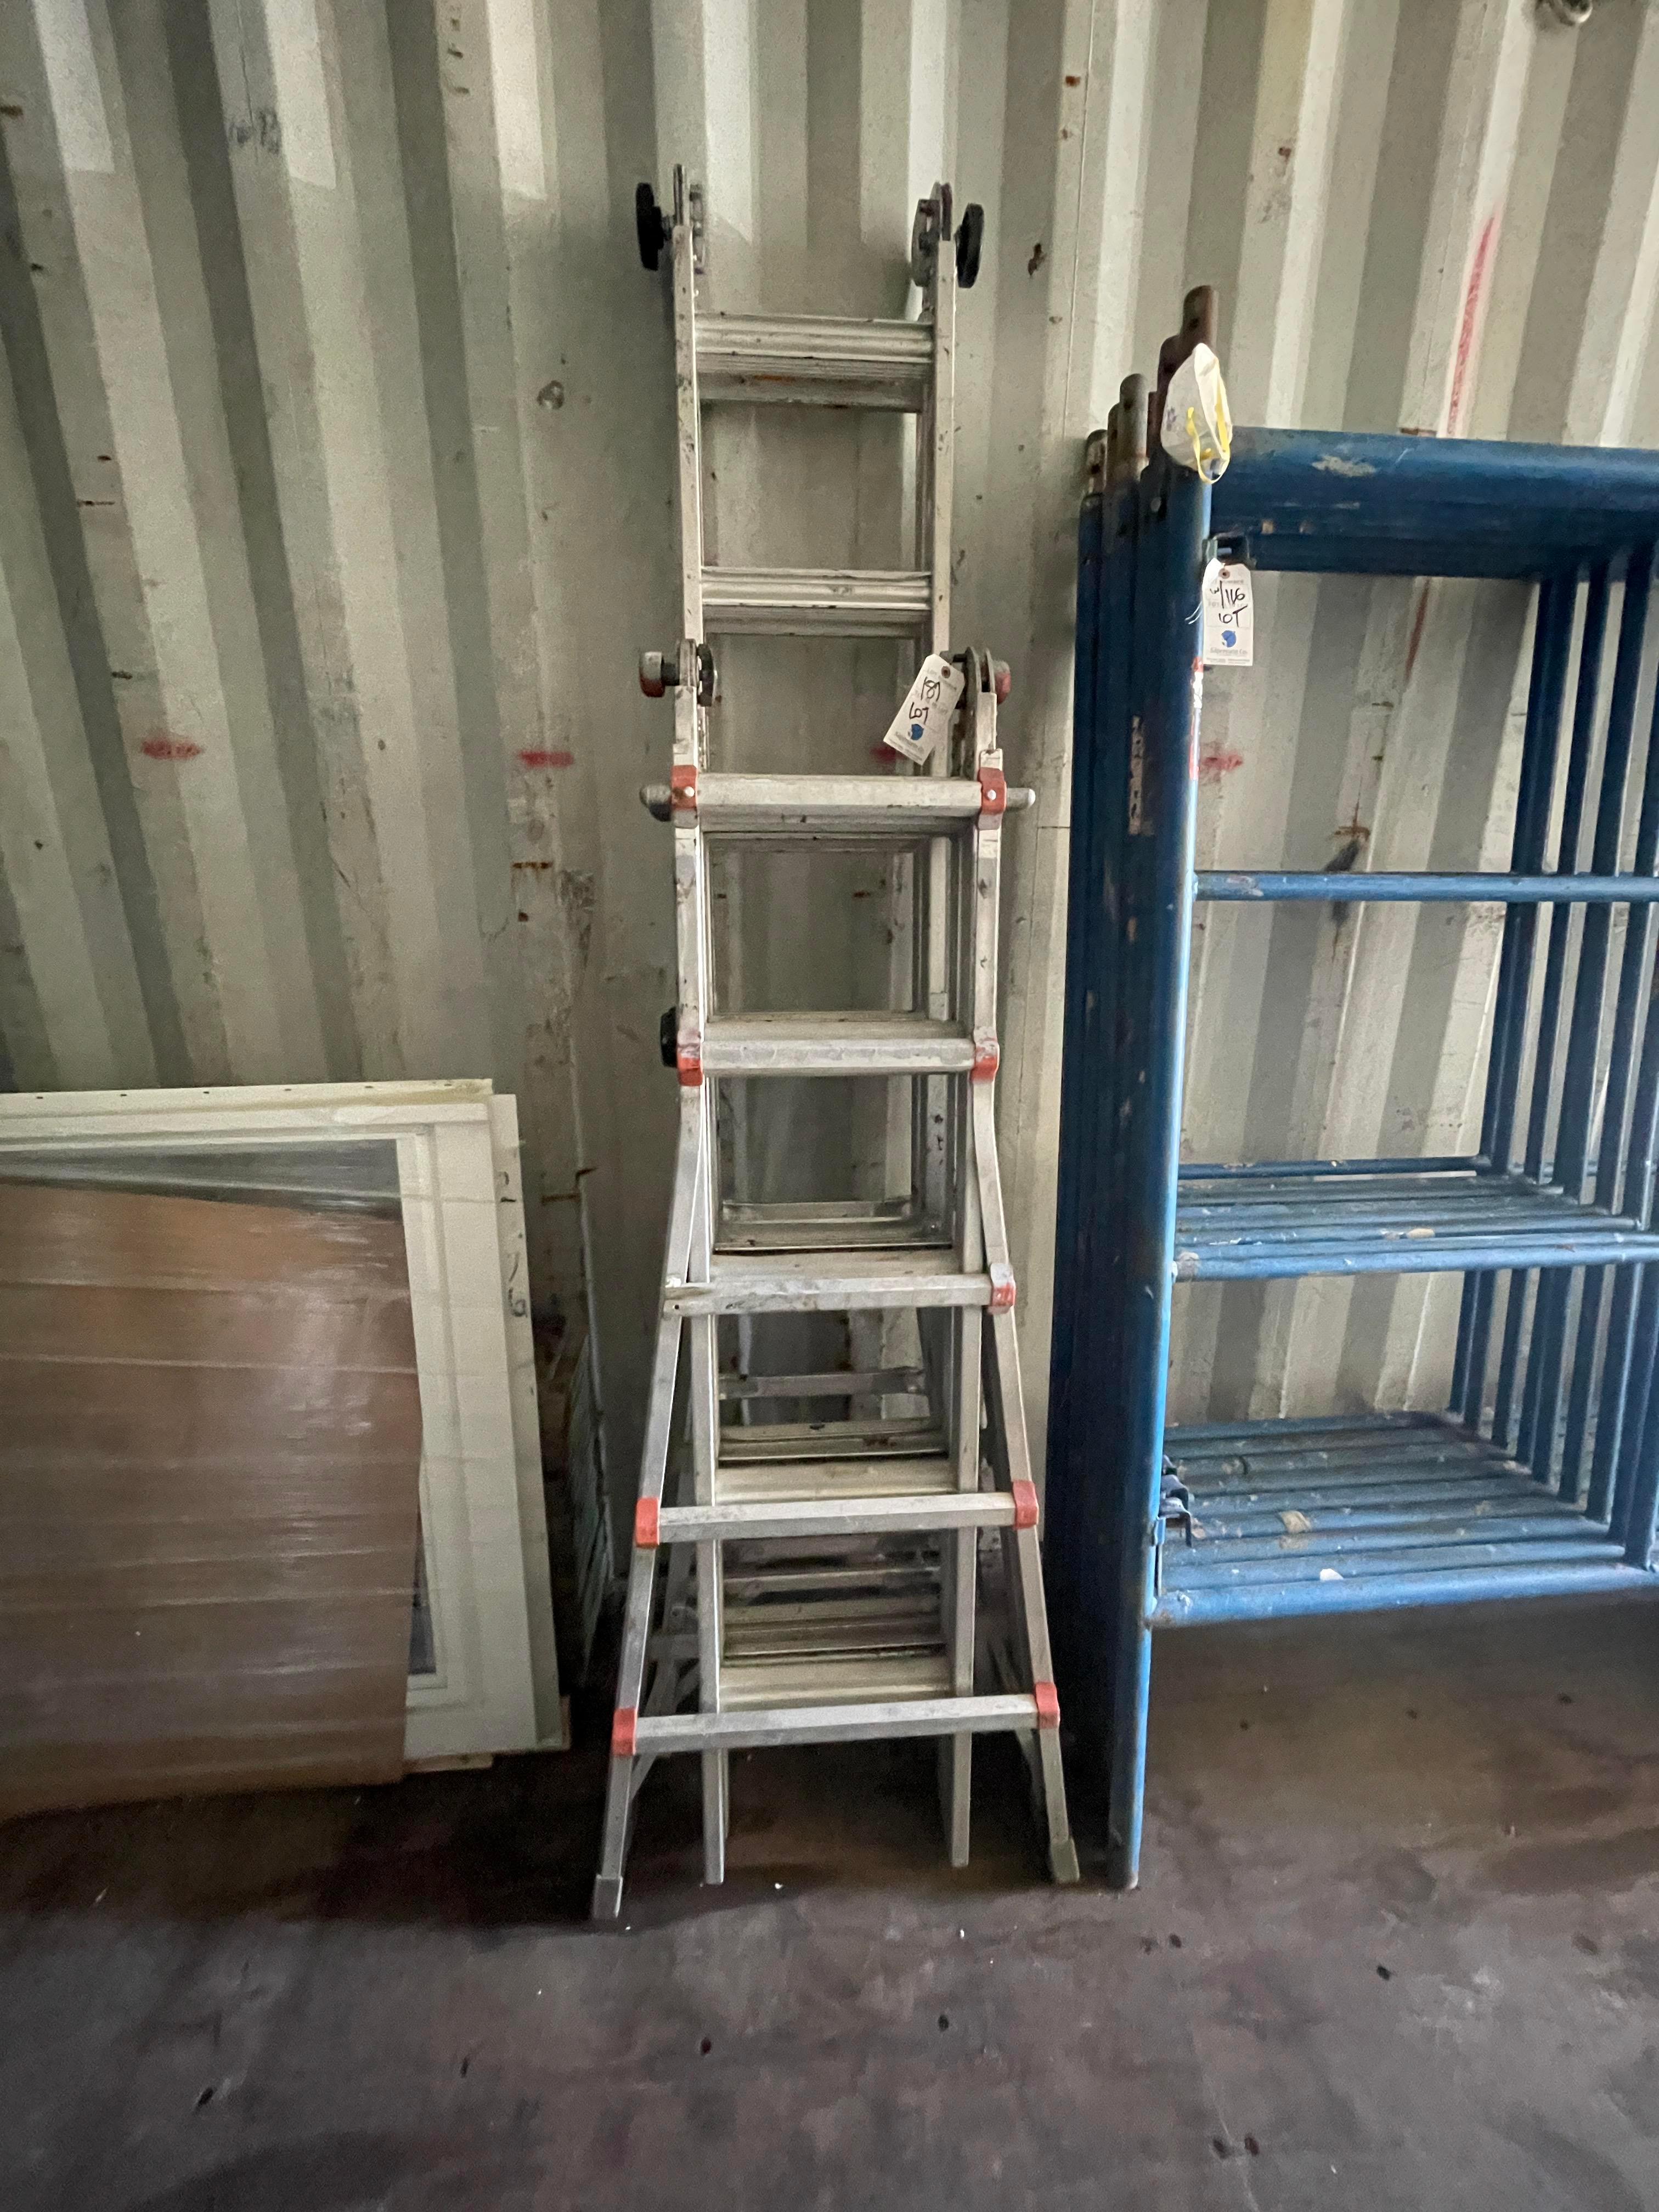 {LOT} Balance in Container C/O: Ladders, Fan, Metal, Motors, Plastic and Metal Drums in One Box